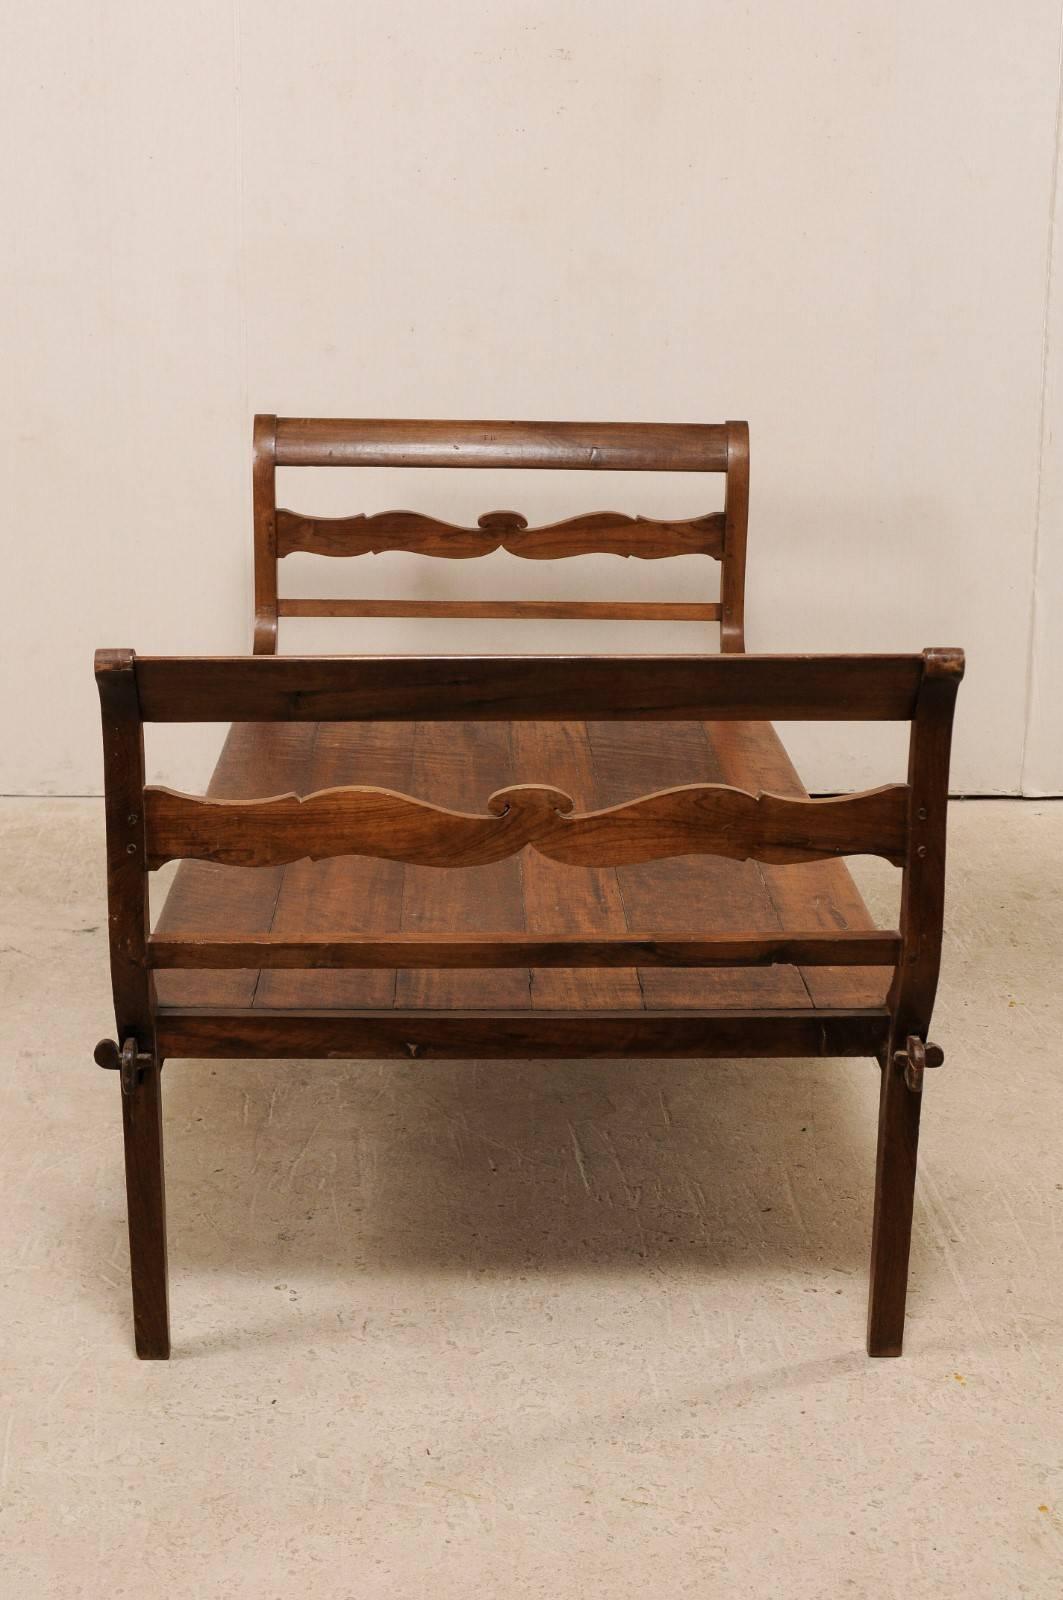 19th Century 19th C. Brazilian Nicely Carved Peroba Hardwood Daybed (or Backless Bench) 